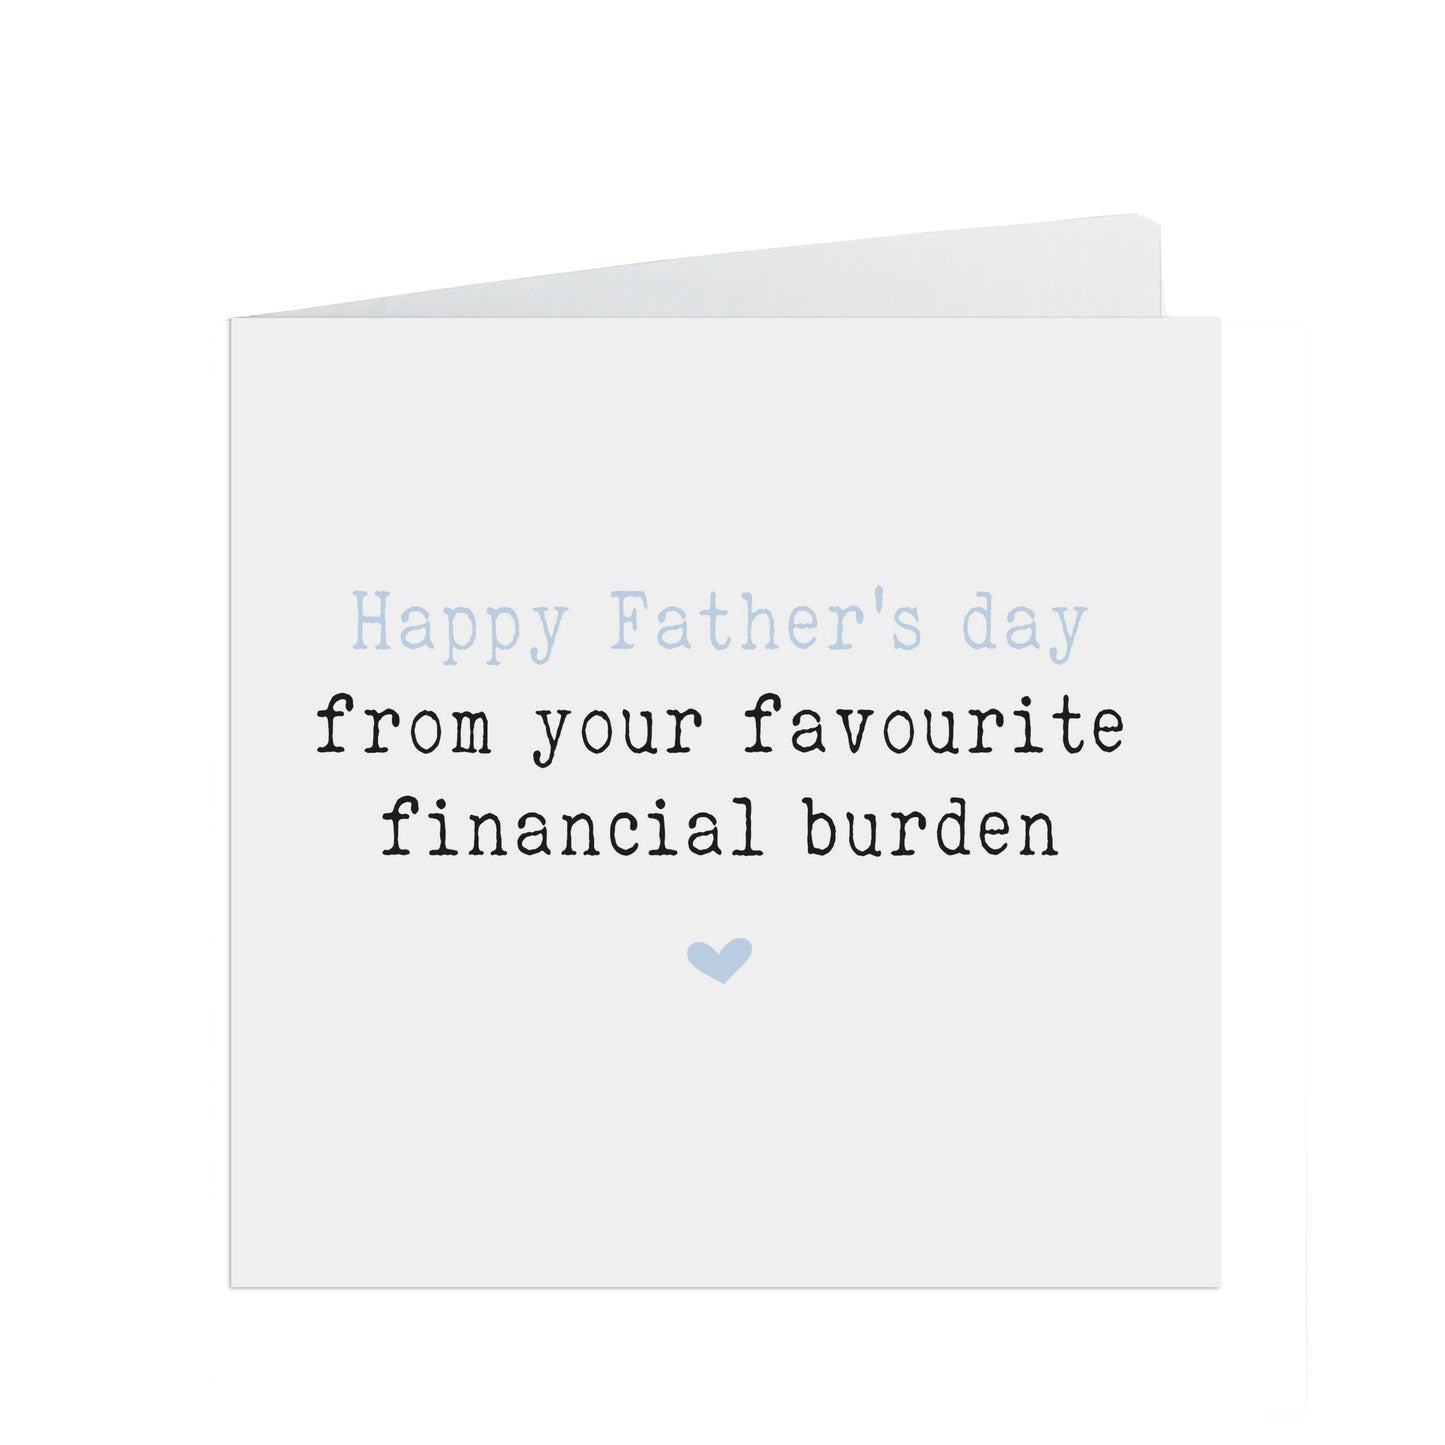  Financial Burden Funny Father's Day Card by PMPRINTED 